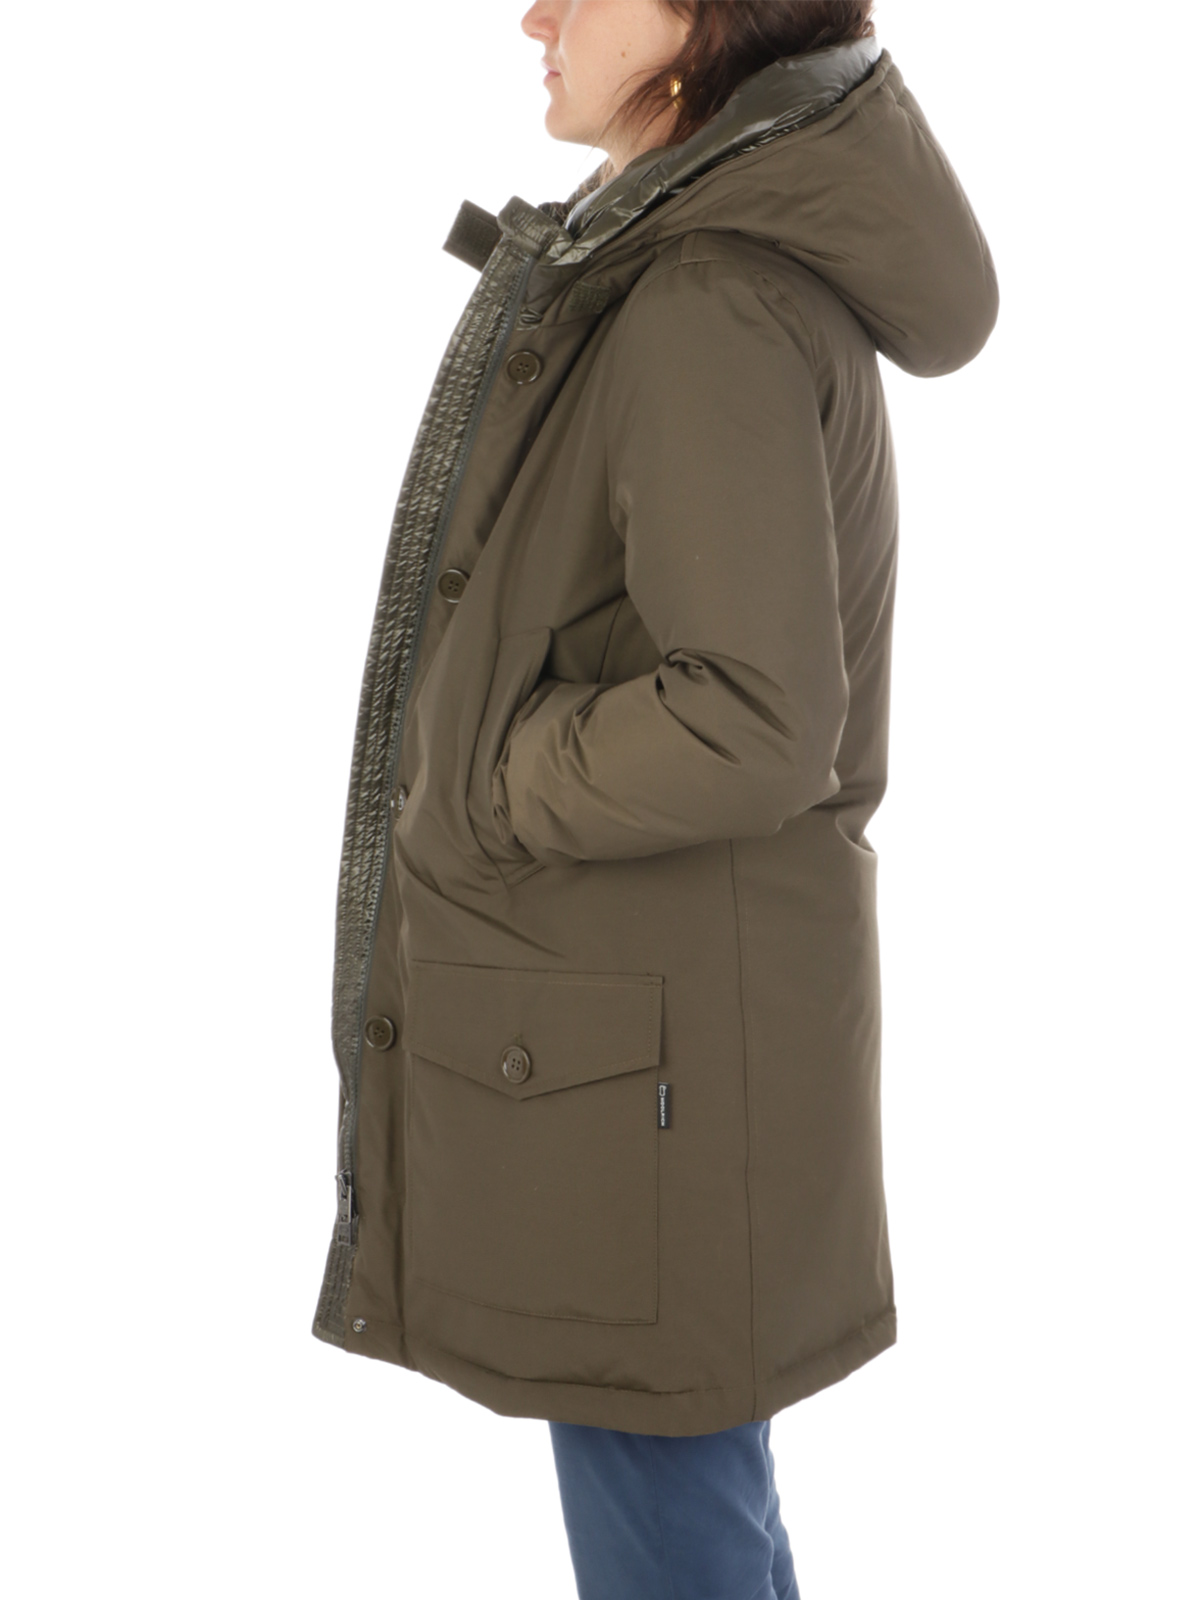 Picture of WOOLRICH | Women's Arctic Parka High Collar Jacket